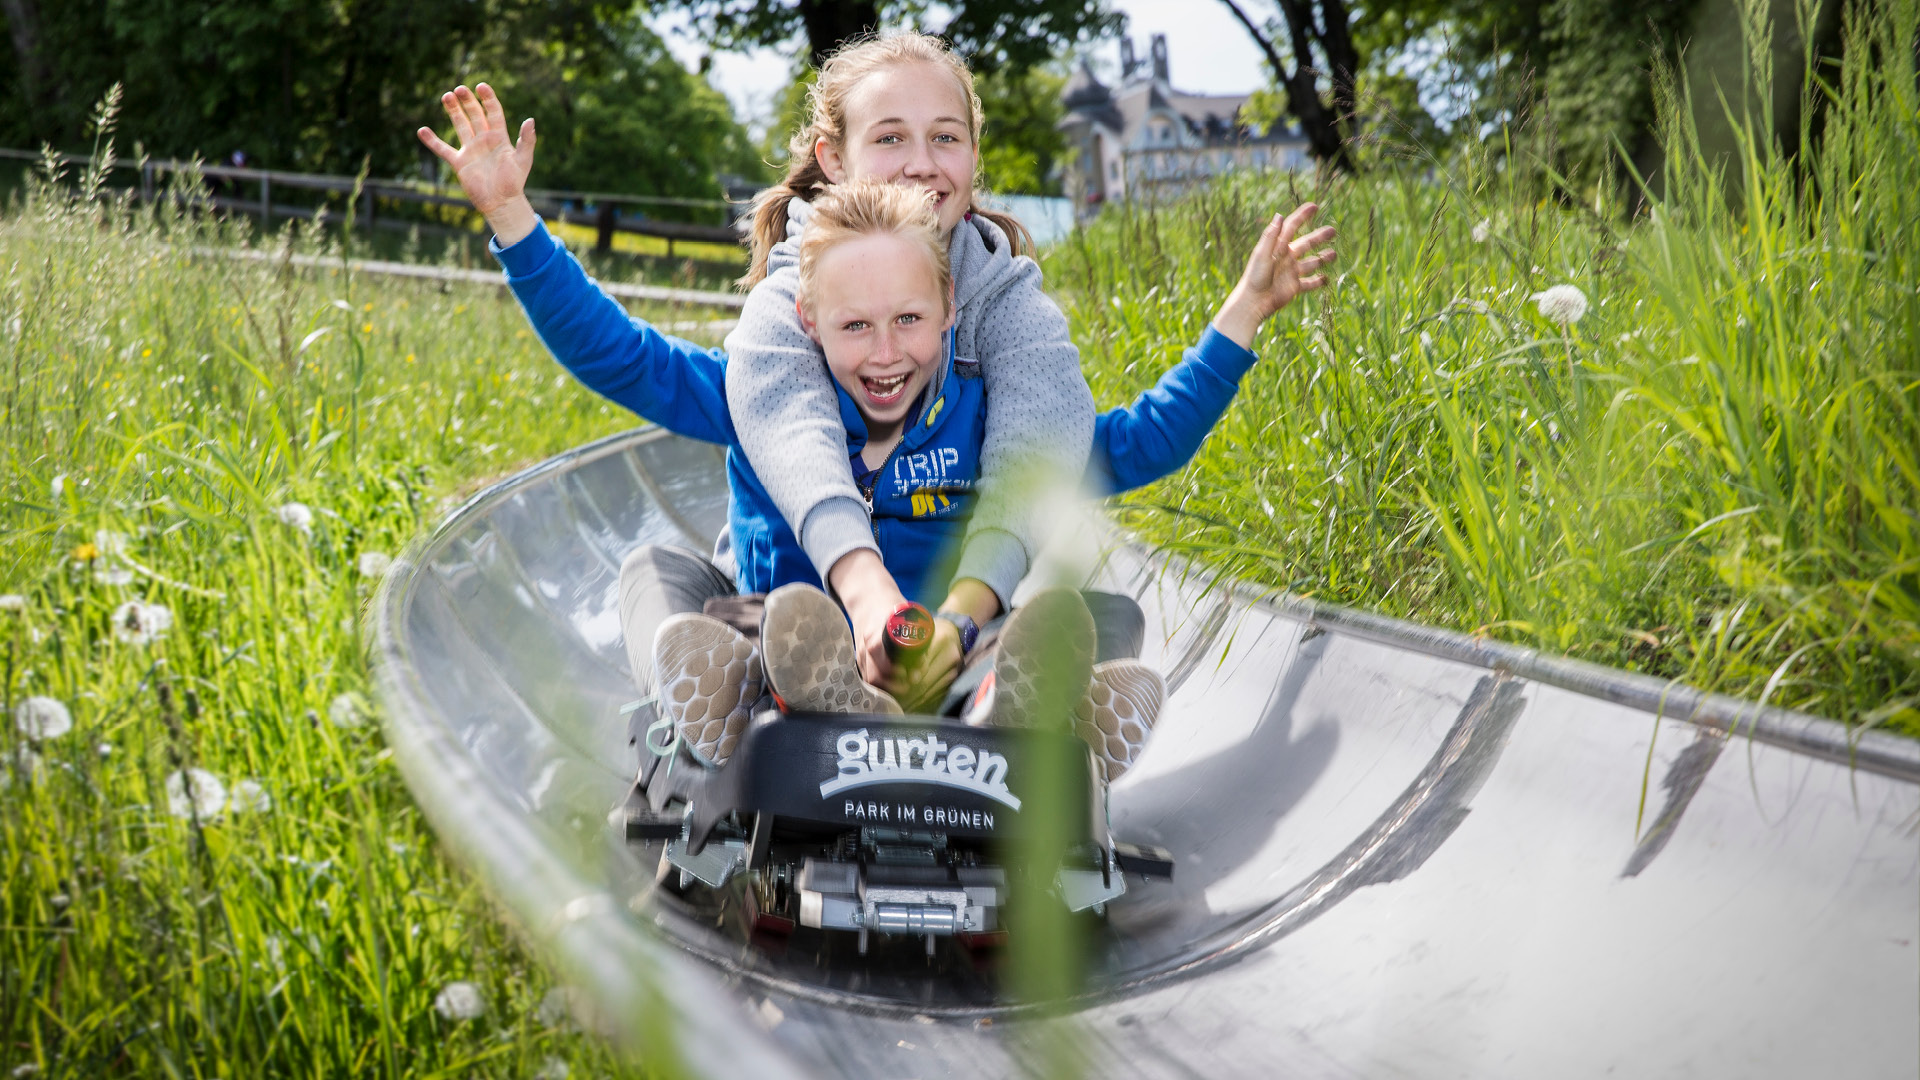 Two children laughing as they race down the summer toboggan run.